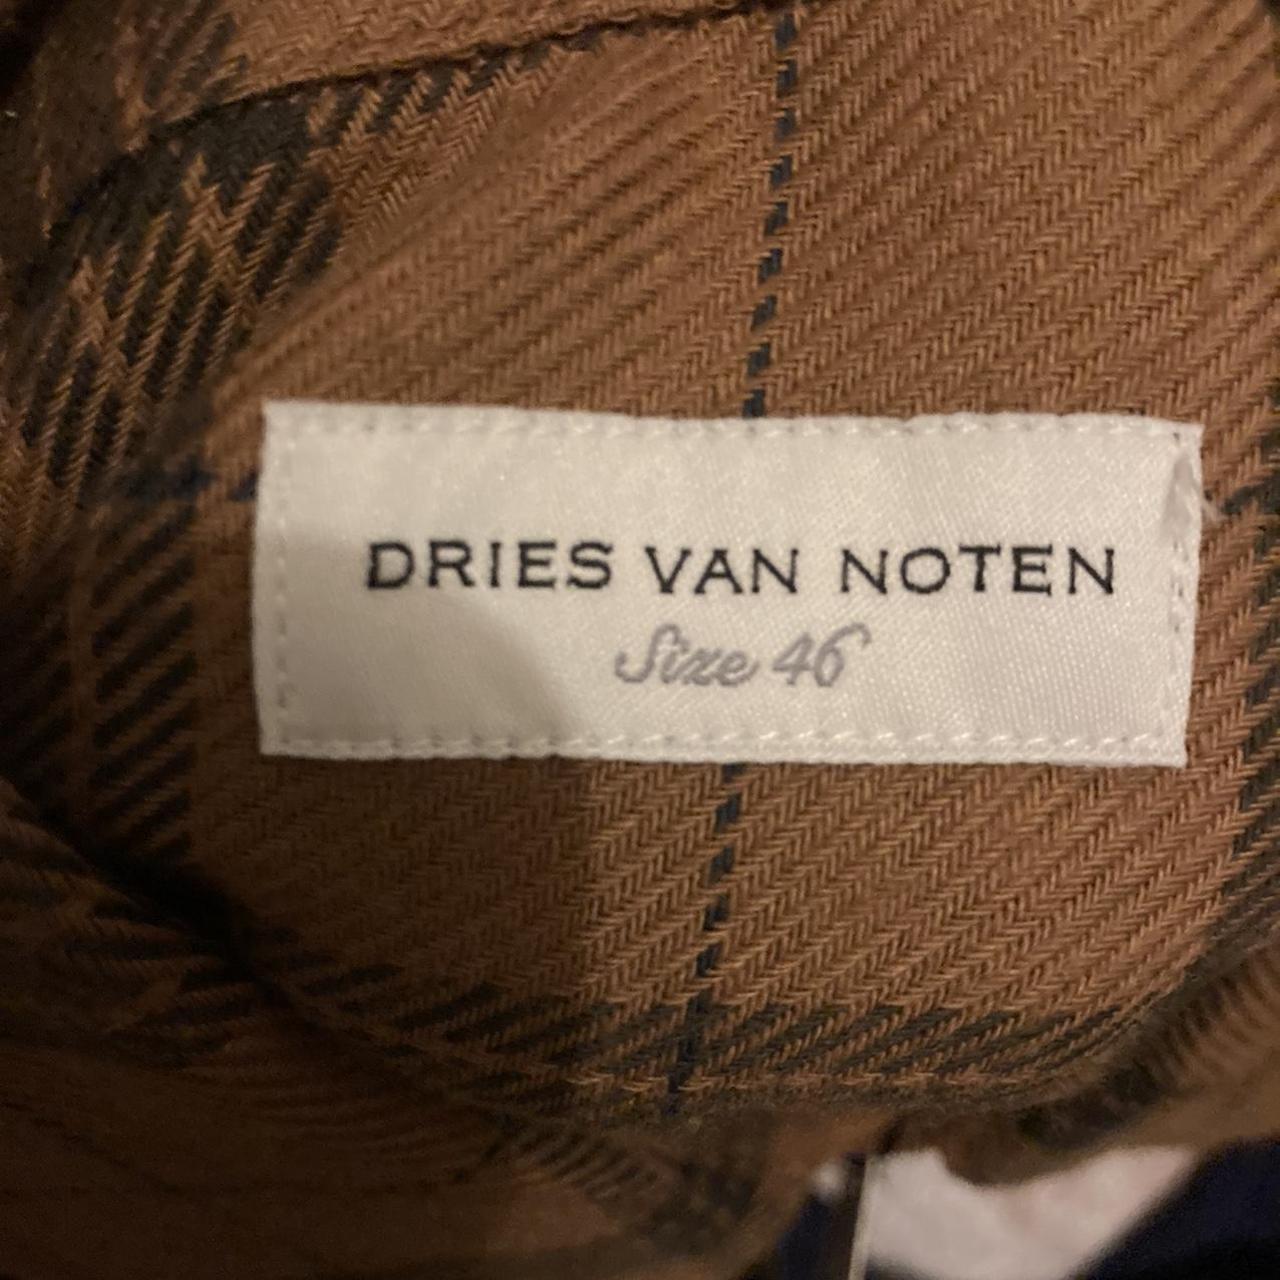 Product Image 4 - Dries Van Noten Flannel Shirt

Listed